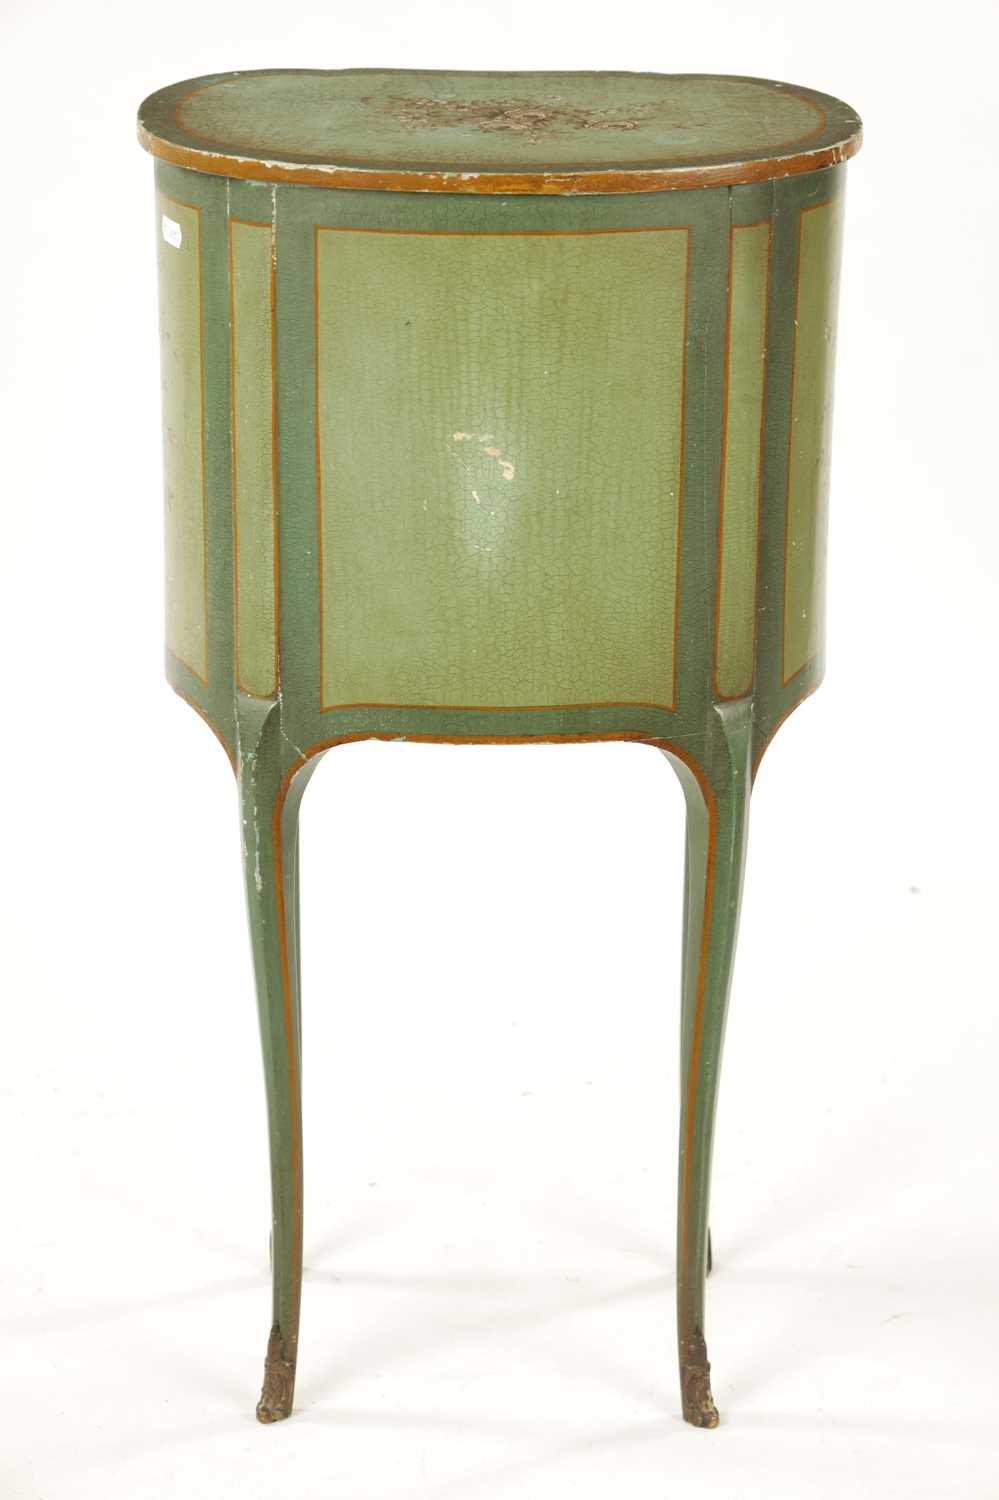 A SMALL FRENCH LATE 18TH CENTURY BEDSIDE TABLE - Image 8 of 8